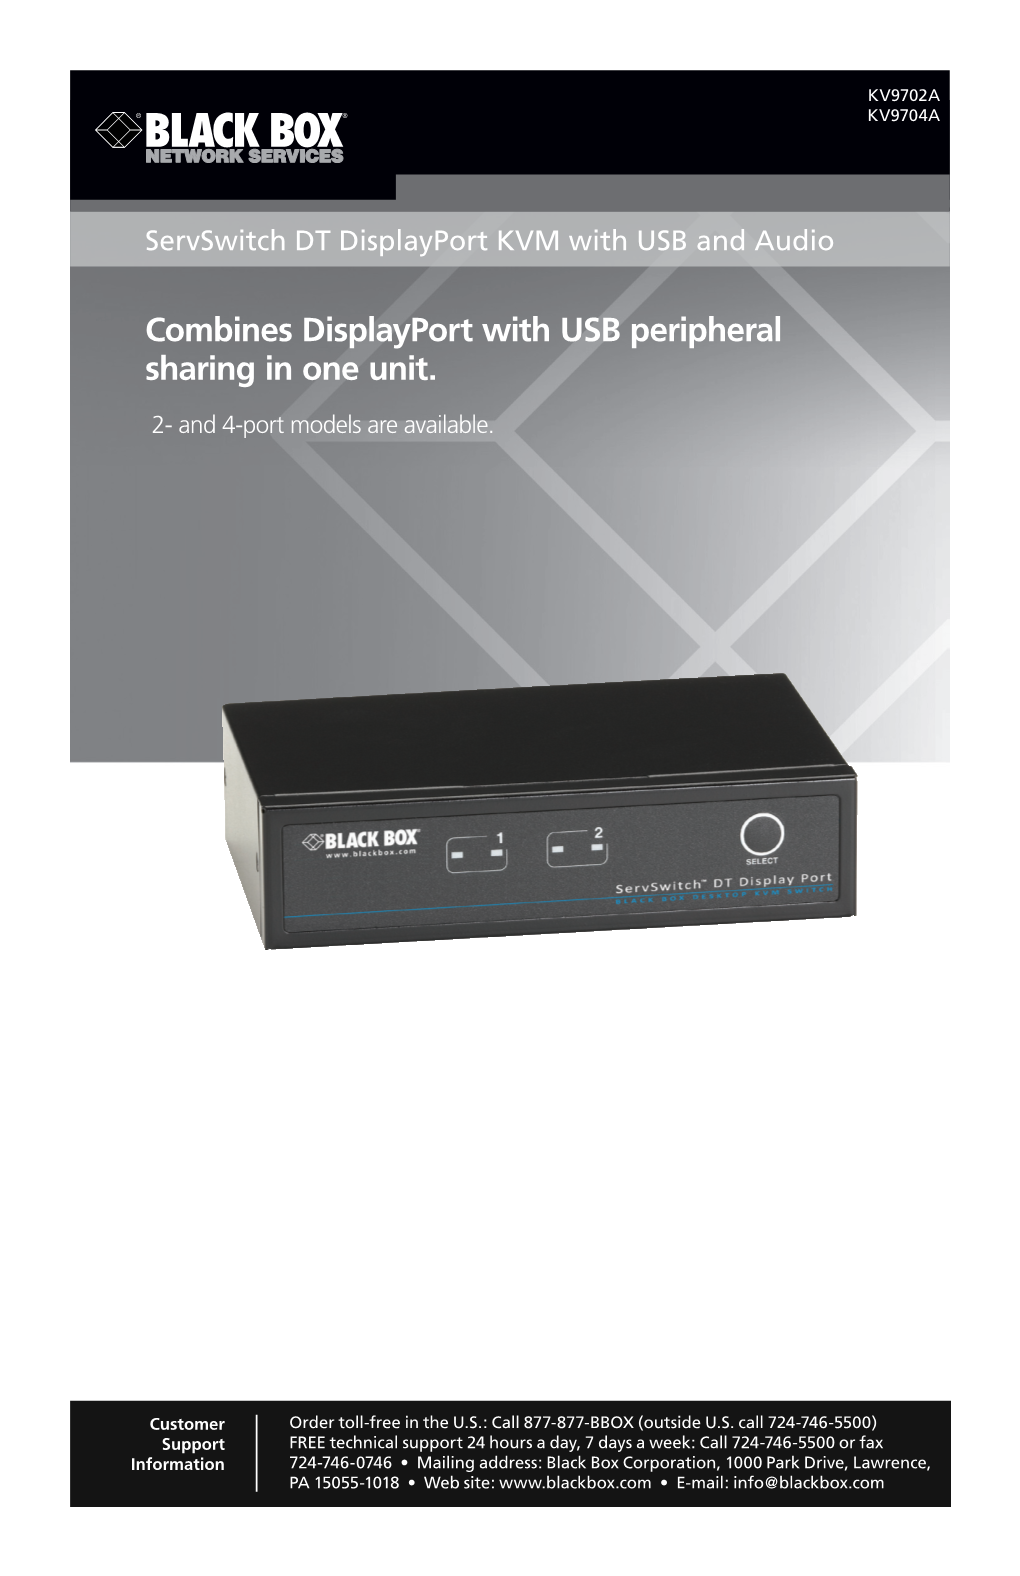 Combines Displayport with USB Peripheral Sharing in One Unit